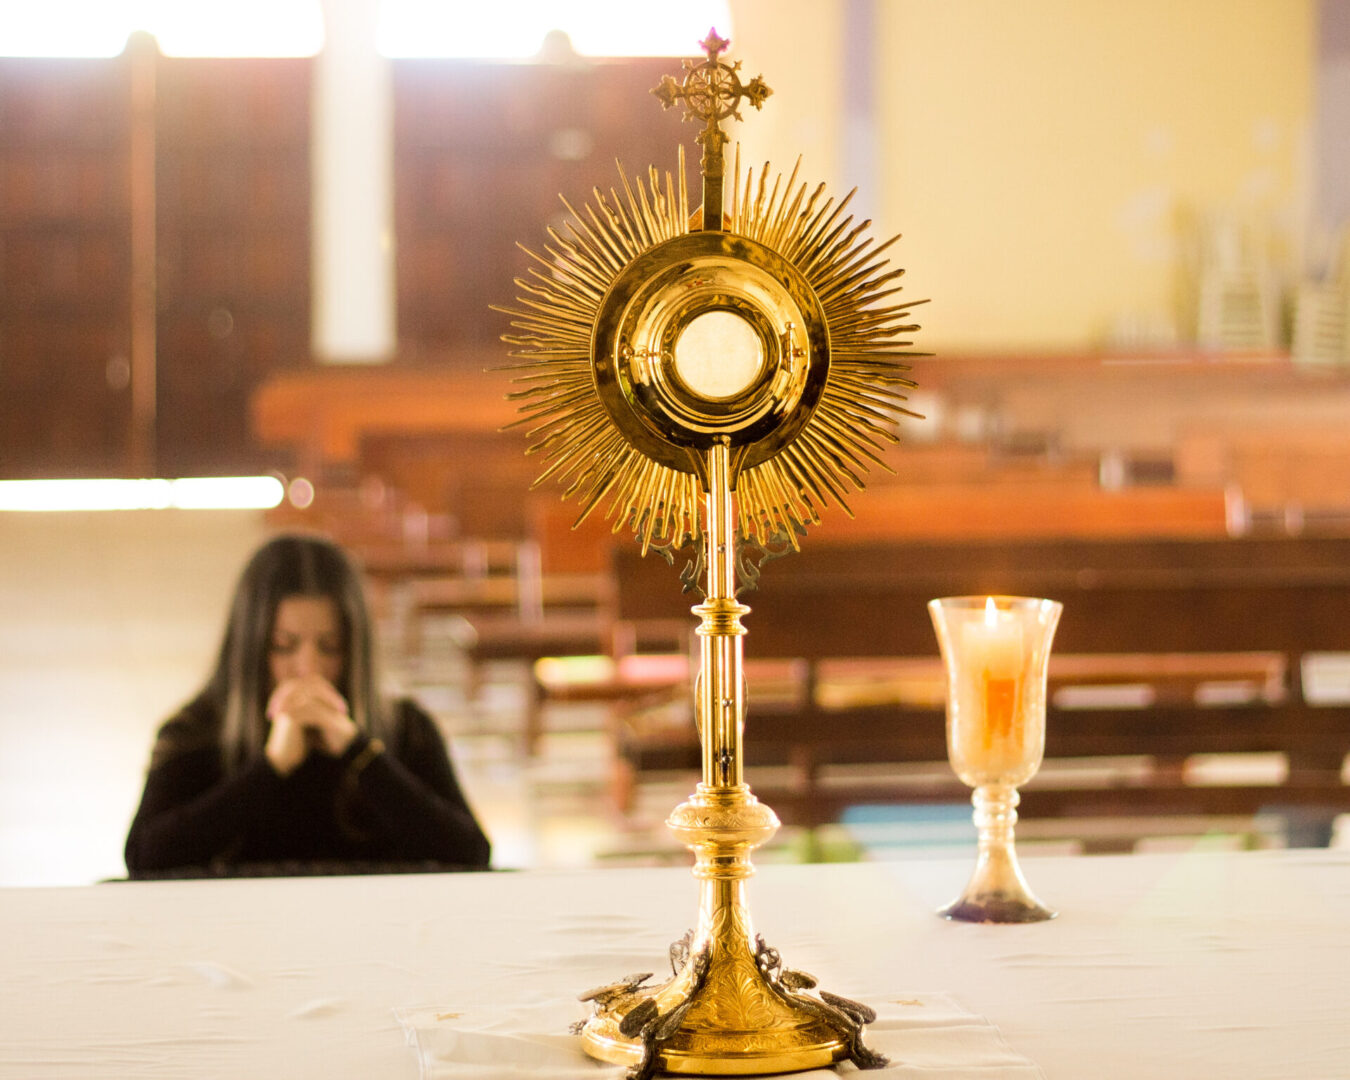 A woman praying in front of the eucharist monstrance